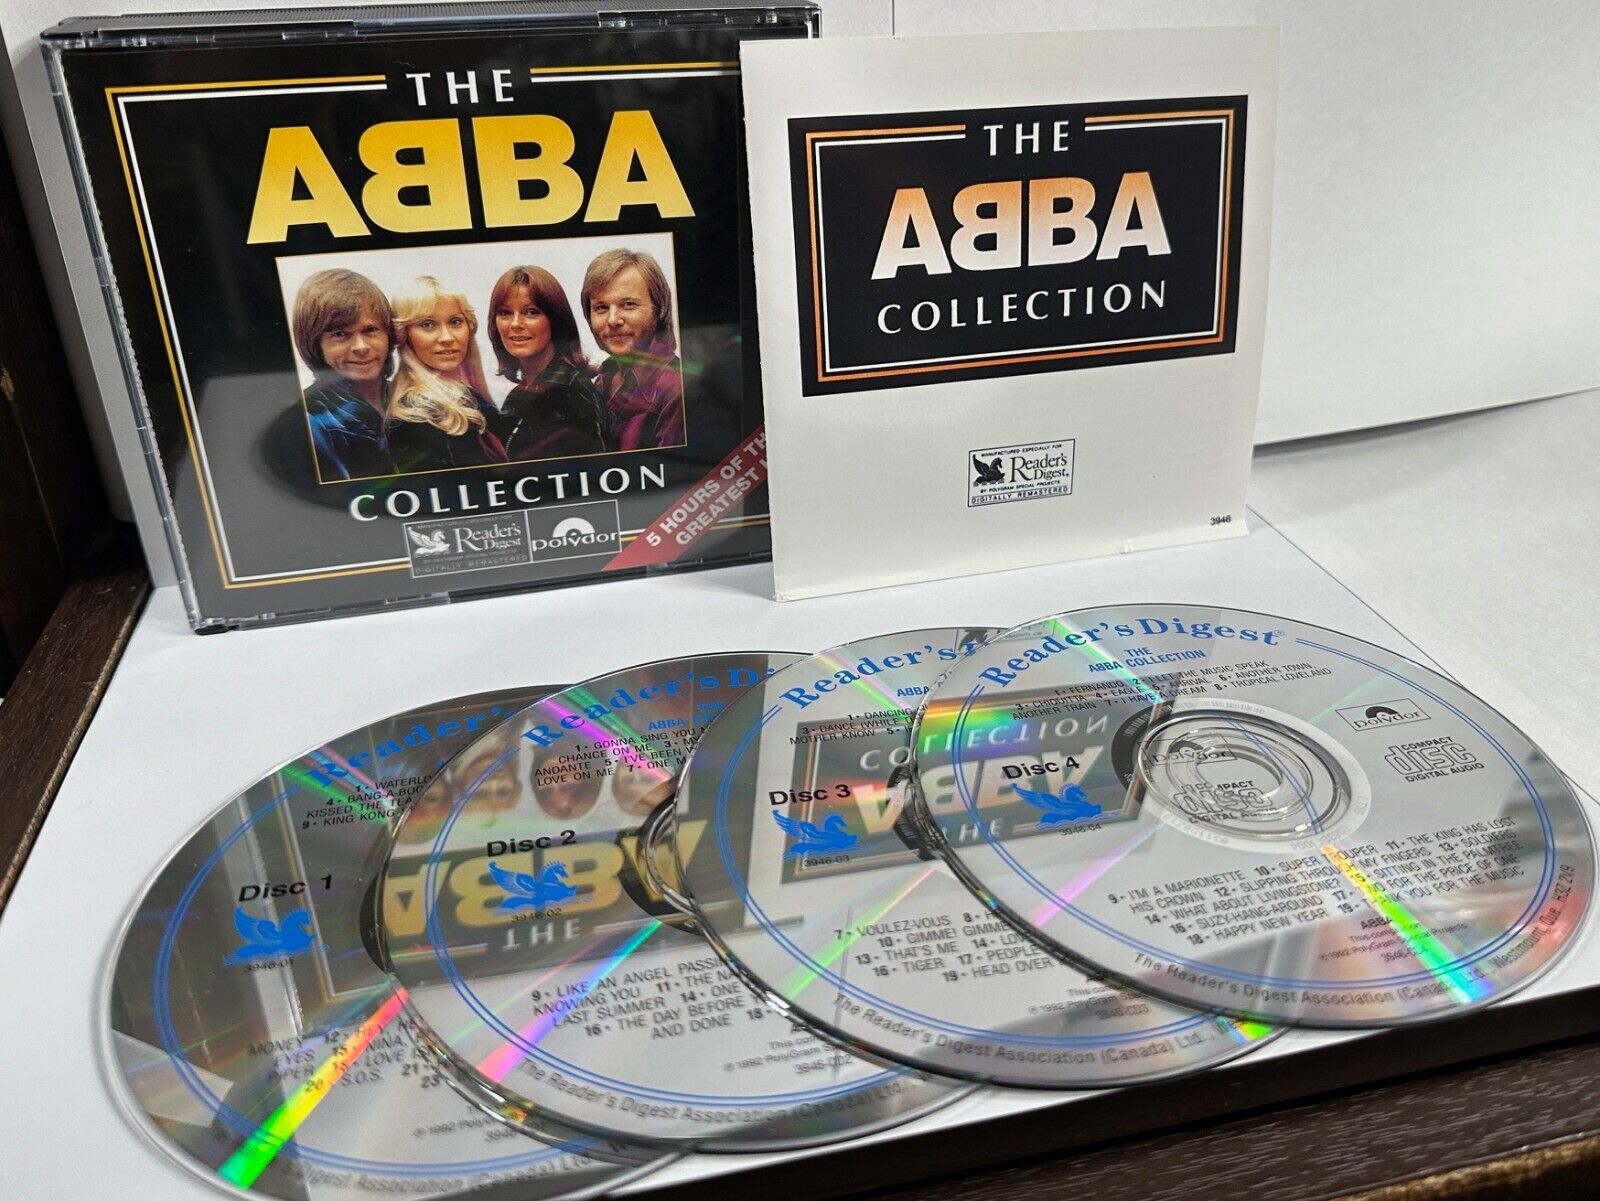 ABBA - The ABBA Collection (4 CD\'s 1992 Reader\'s Digest) 5 Hrs - Near MINT